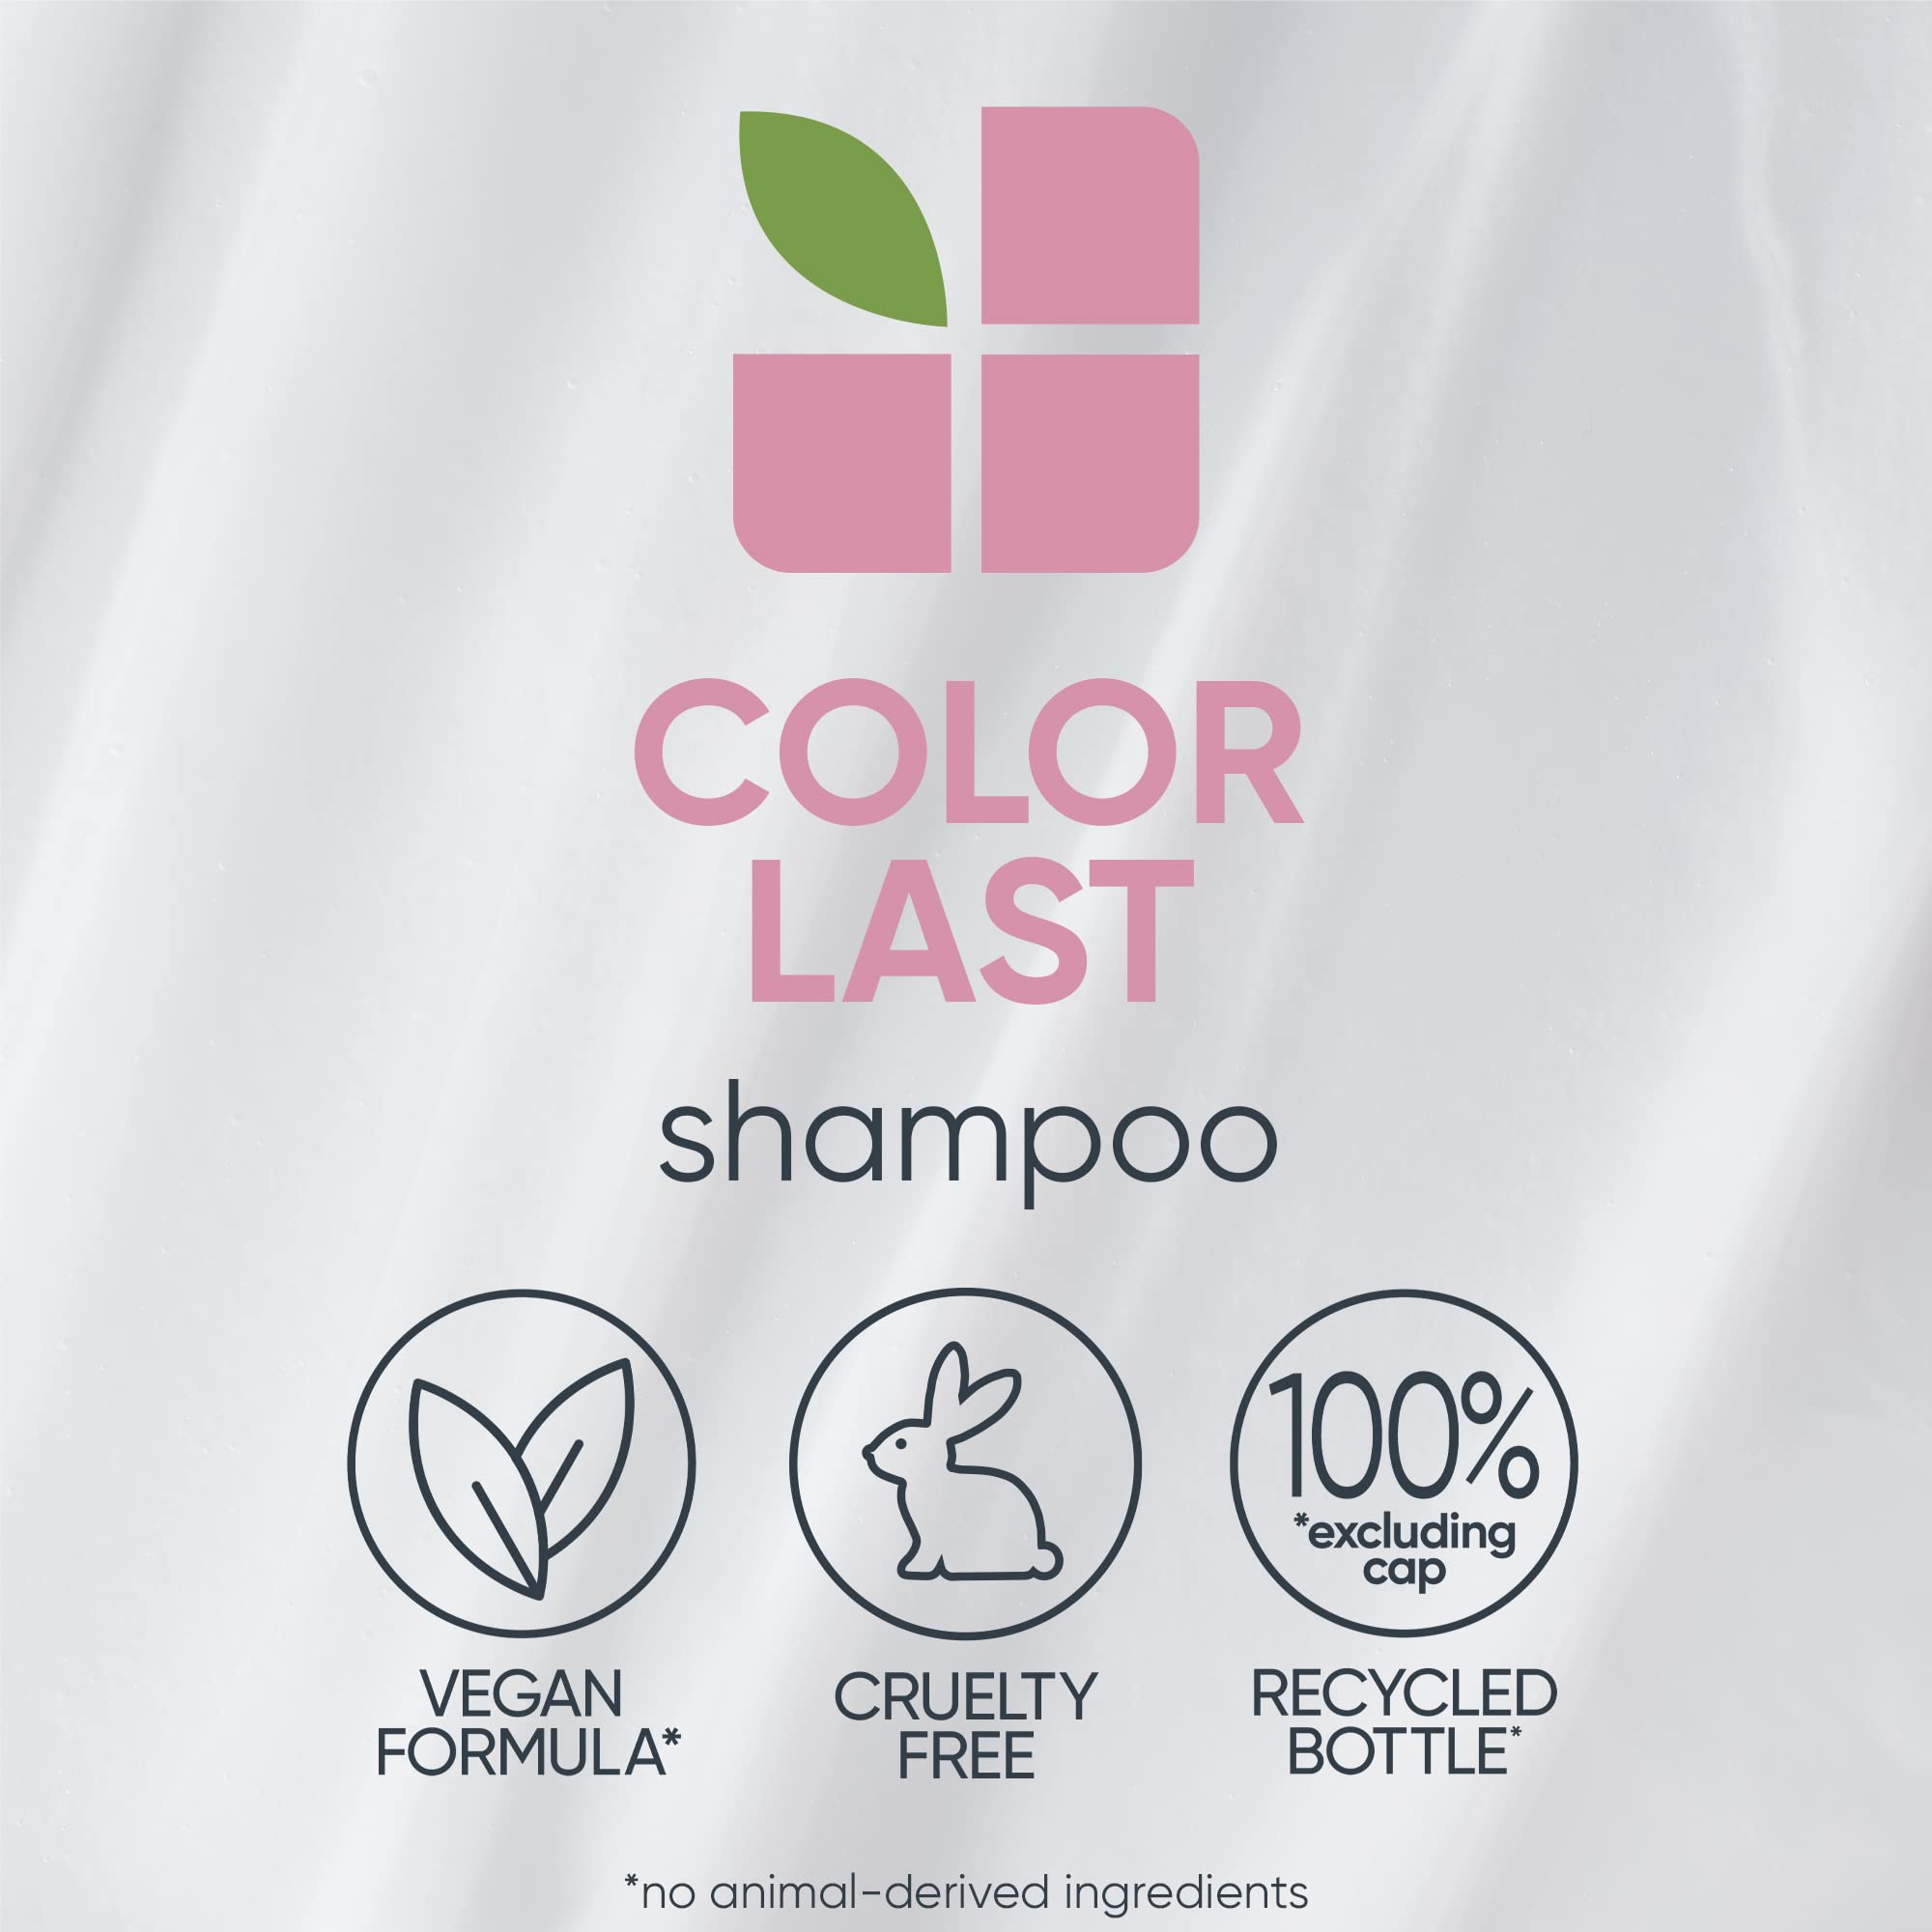 Biolage Color Last Shampoo | Helps Protect Hair & Maintain Vibrant Color | For Color-Treated Hair | Paraben & Silicone-Free | Vegan | Cruelty Free | Color Protecting Salon Shampoo